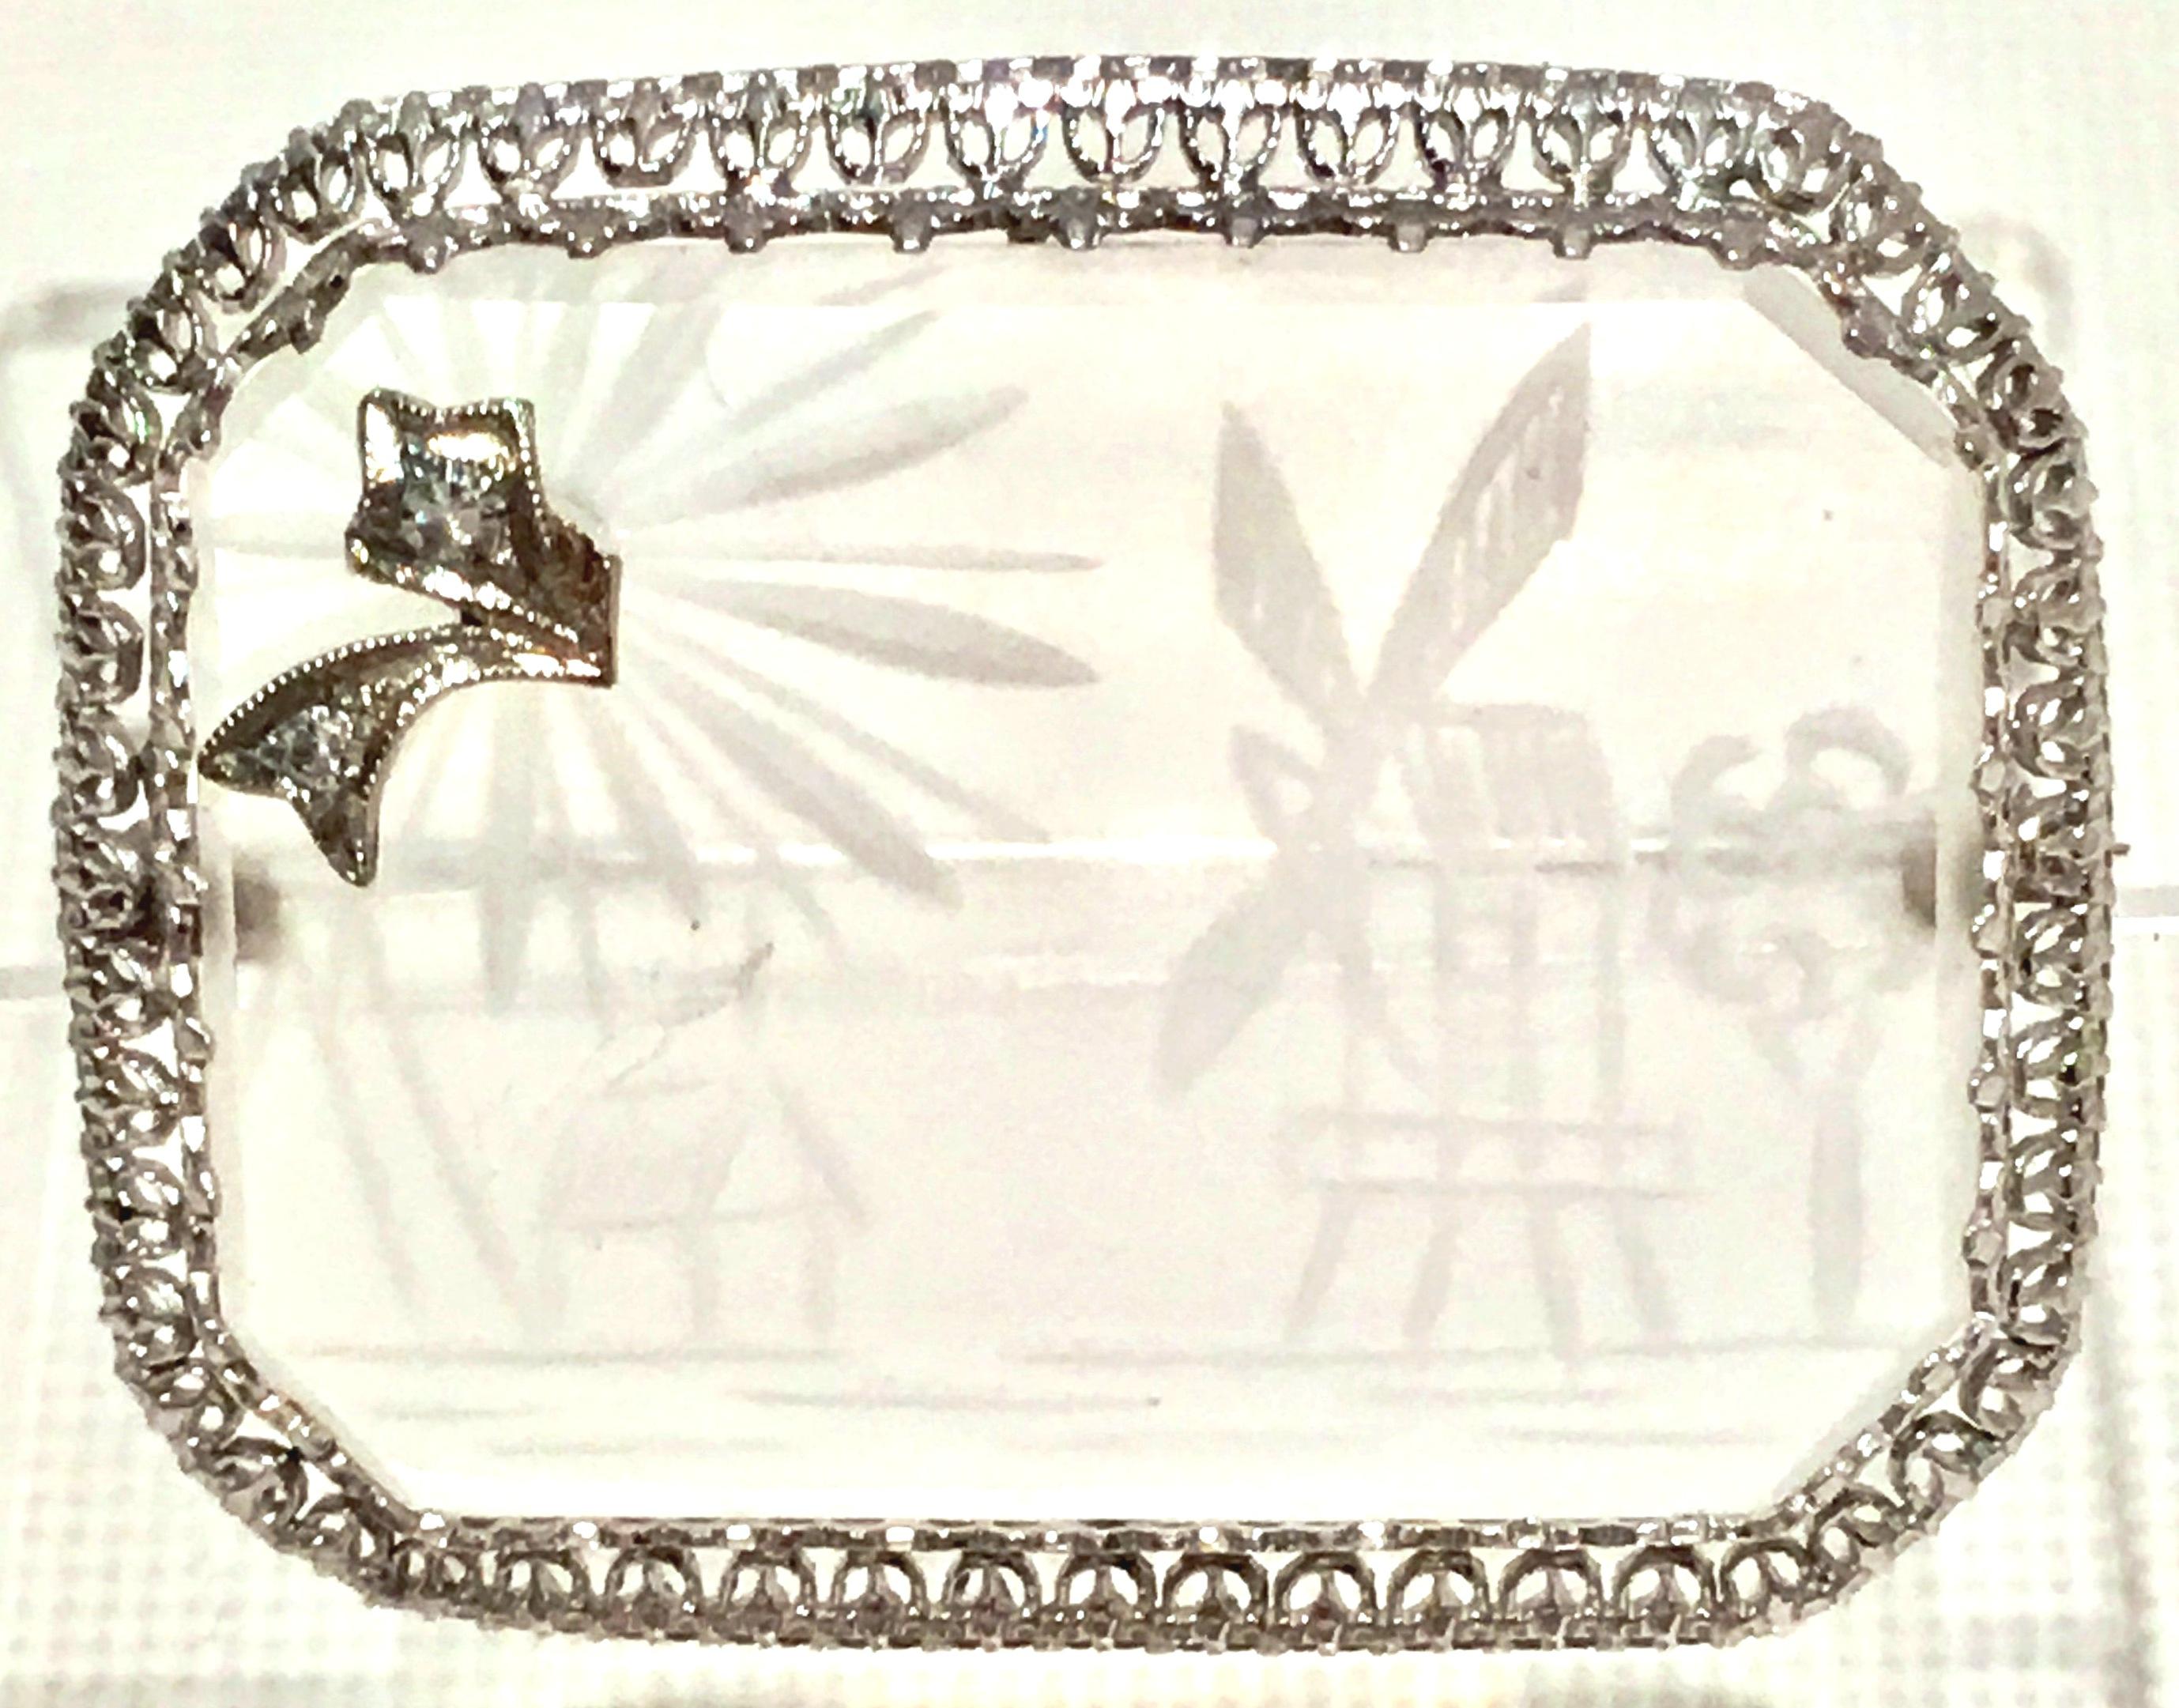 Antique Etched Rock Crystal & Diamond Platinum Set Filigree Brooch. This rare piece features a filigree platinum setting with an etched rock crystal windmill & church with tree motif. Finished with a platinum set raised two diamond stone detail.